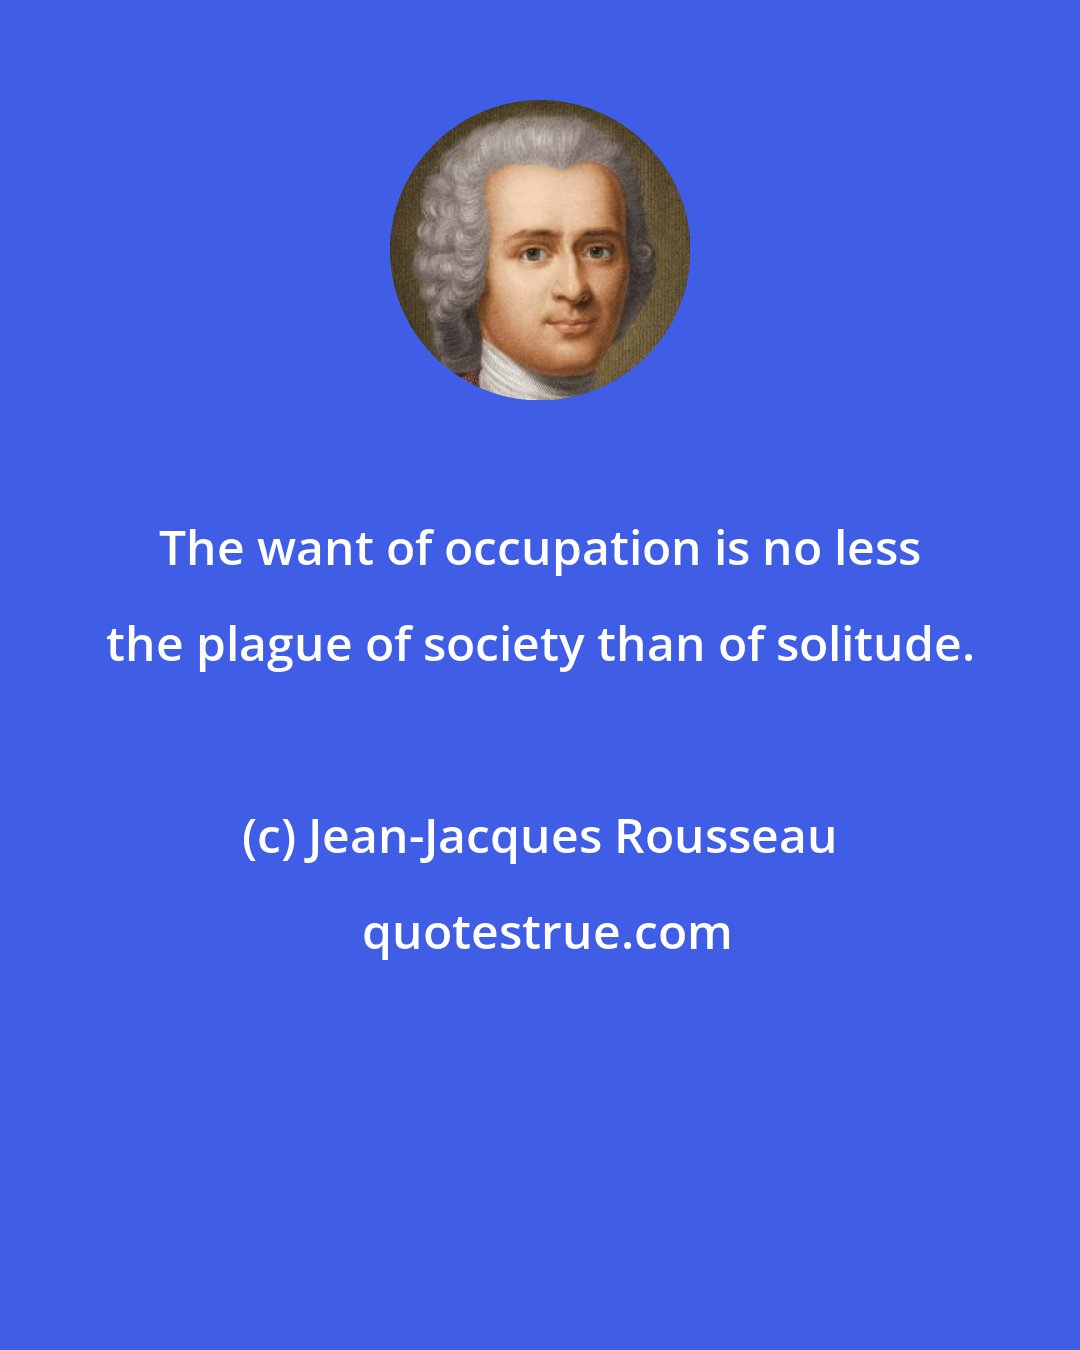 Jean-Jacques Rousseau: The want of occupation is no less the plague of society than of solitude.